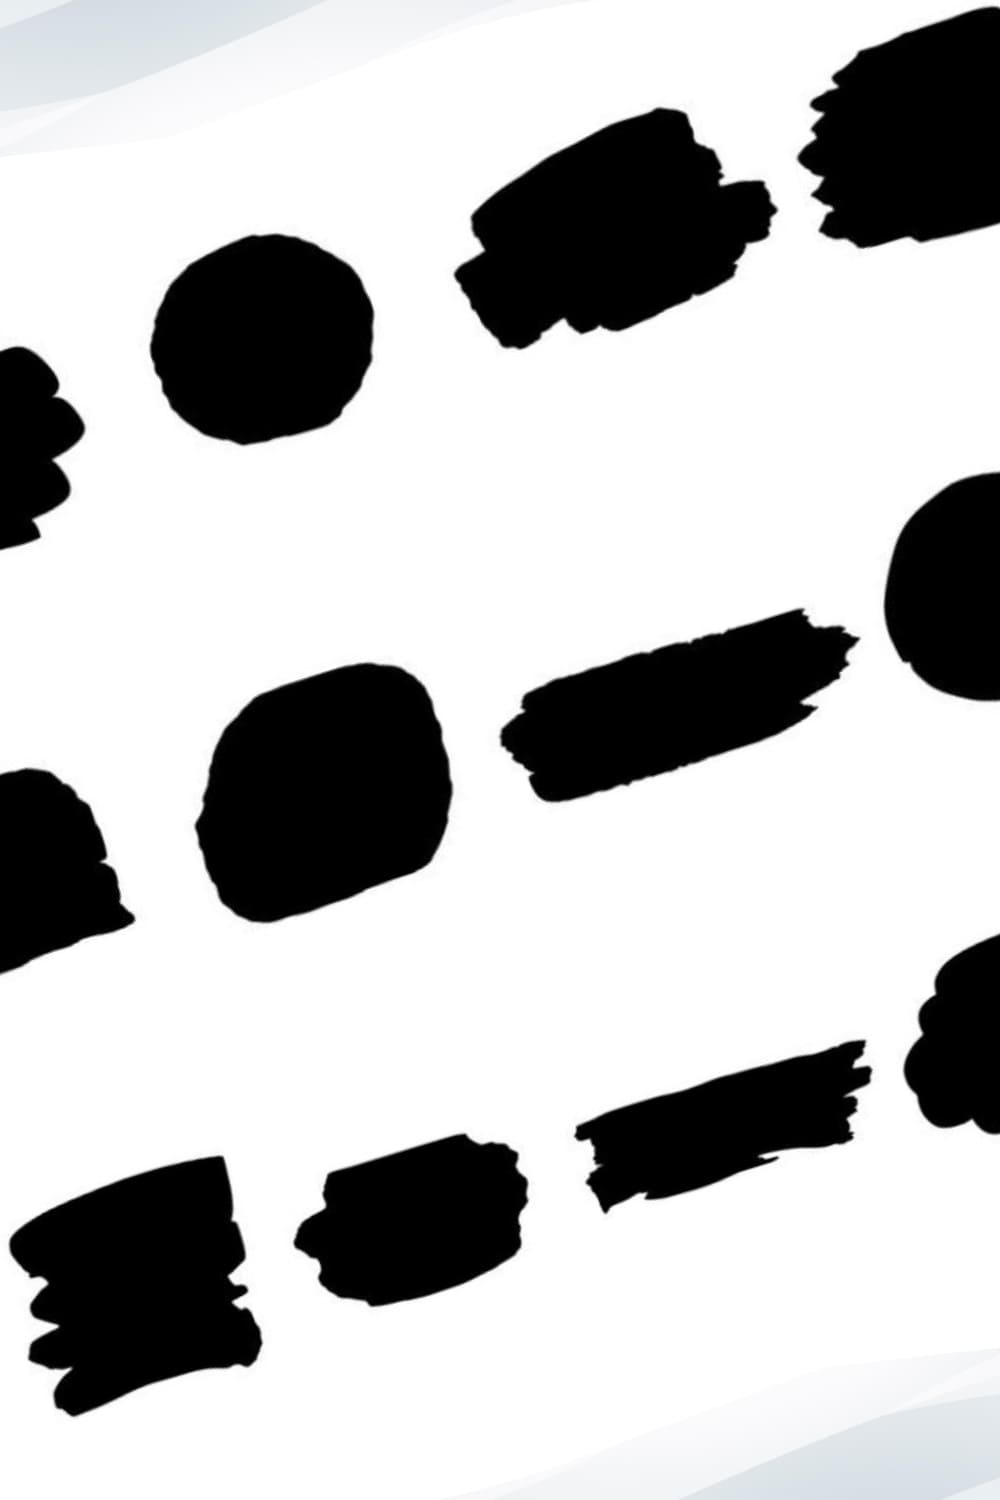 Diverse of brush shapes in BW colors.